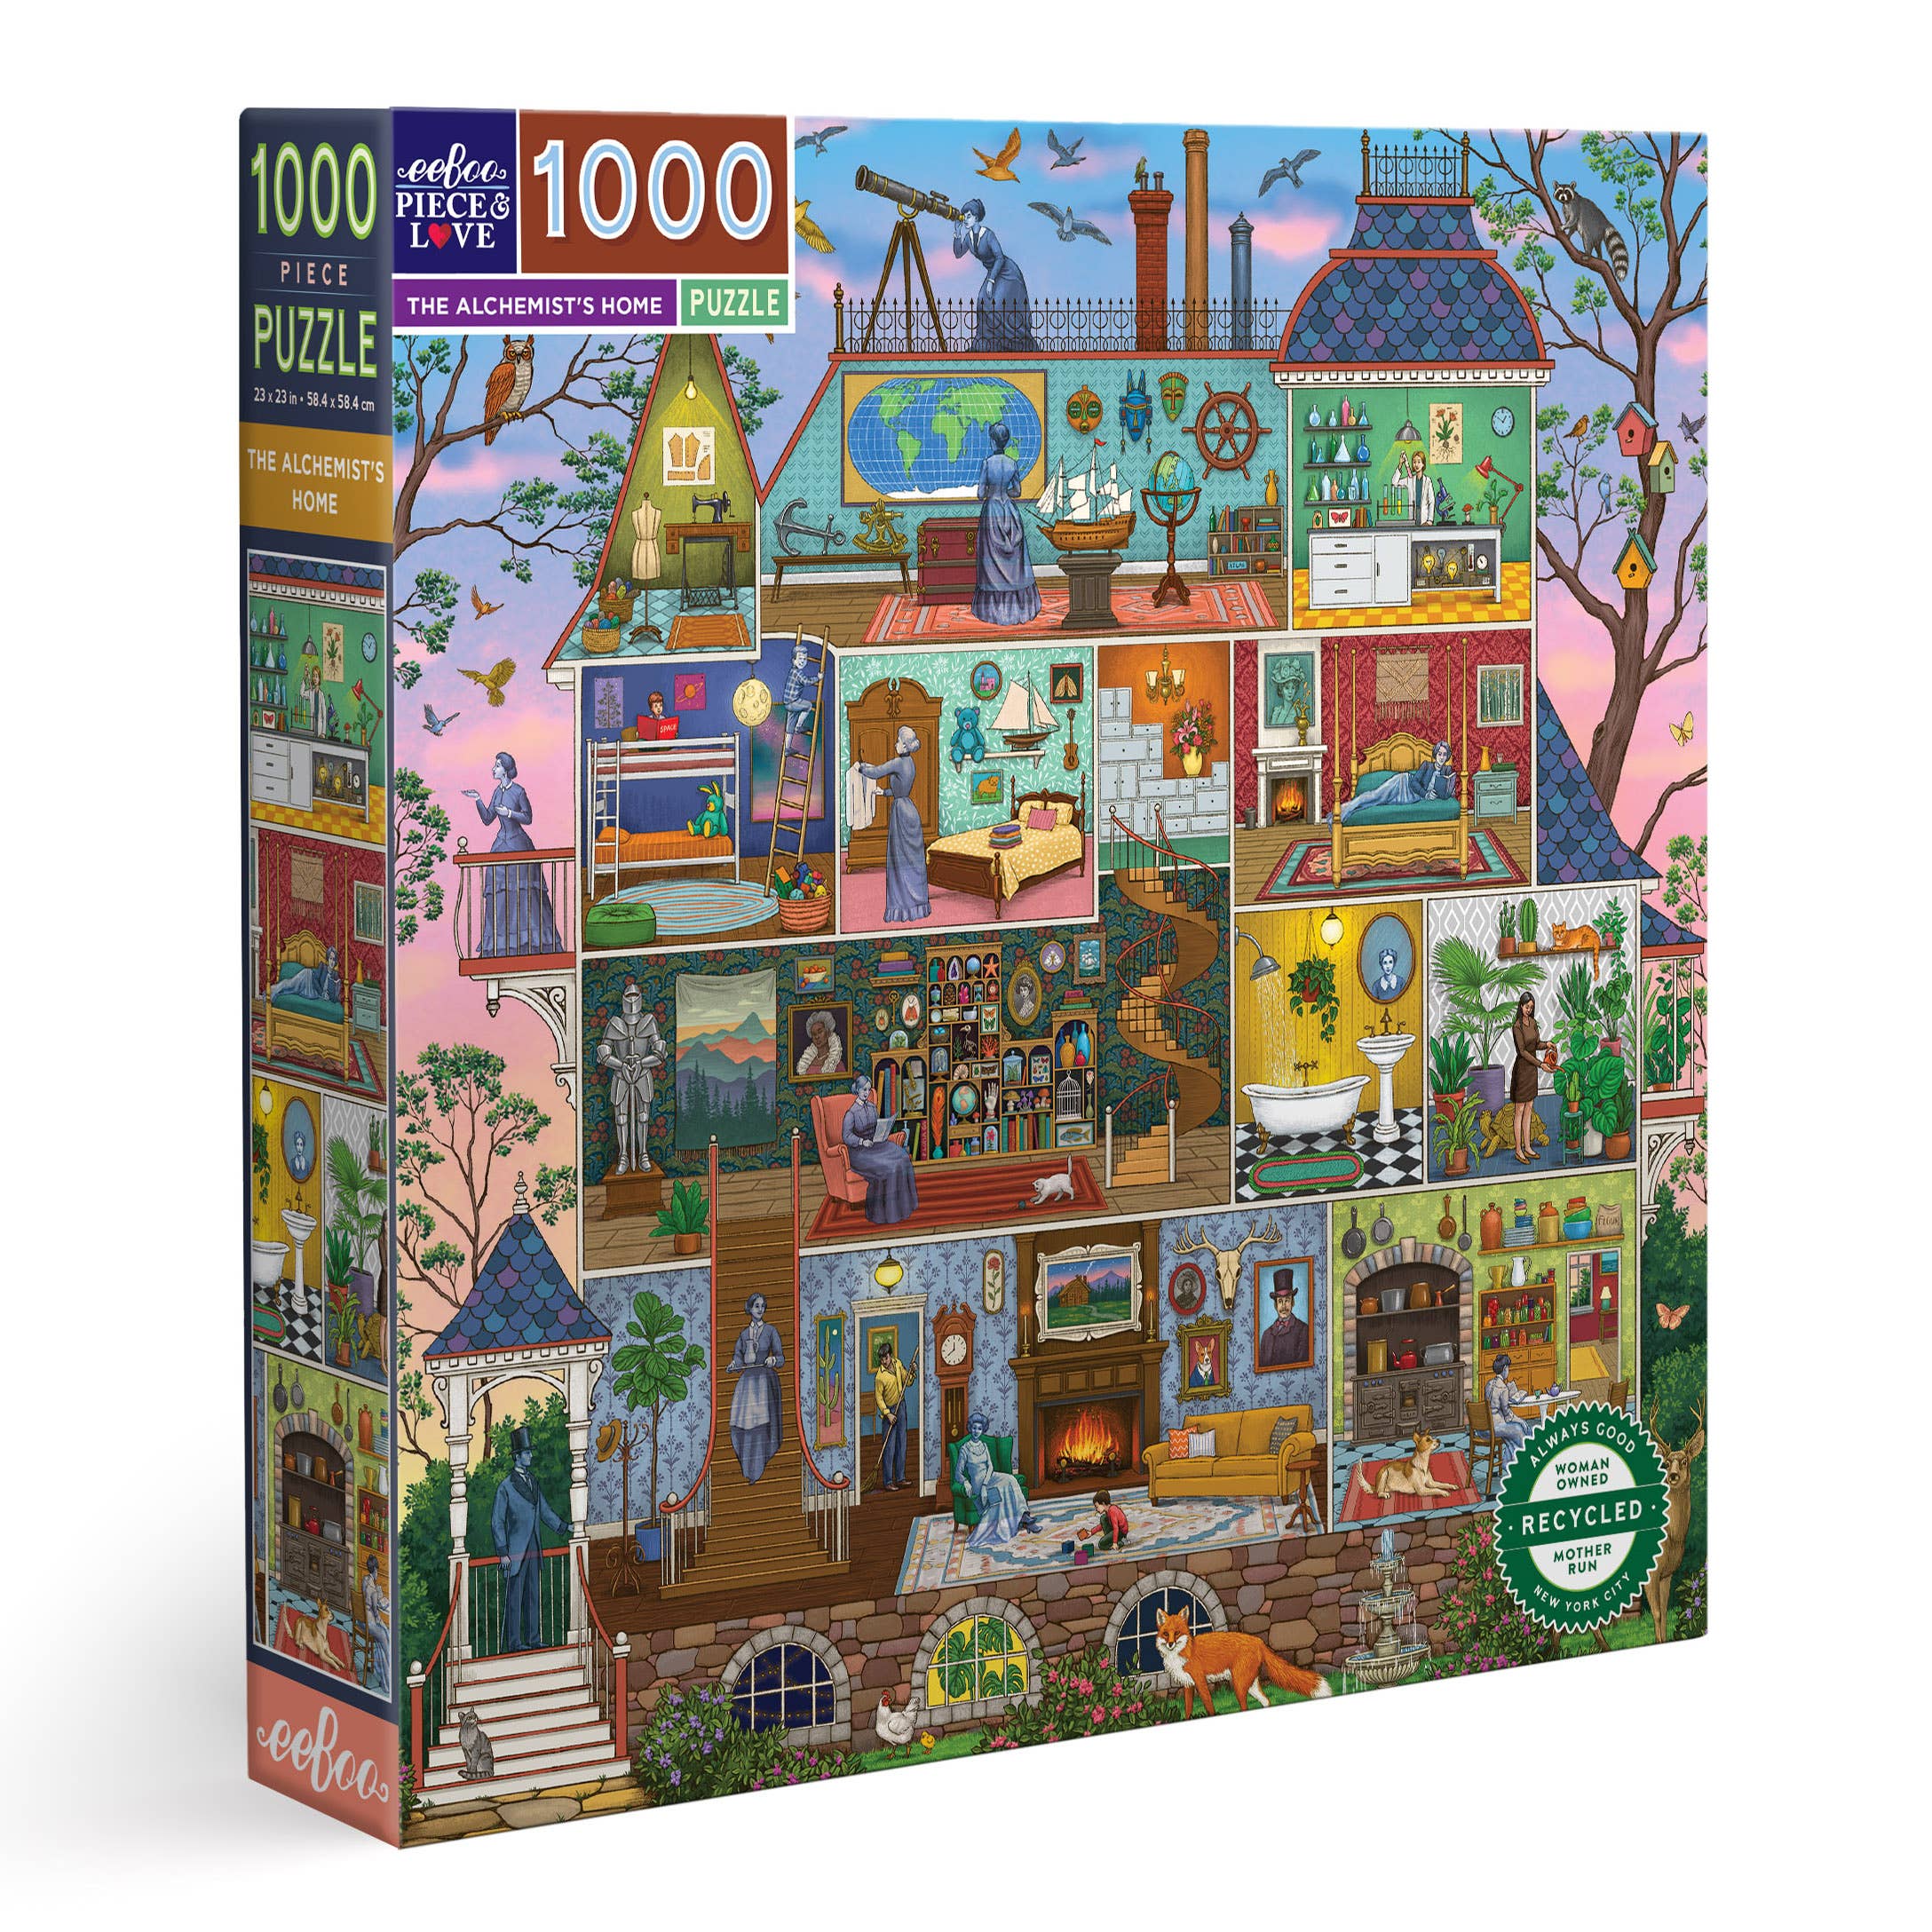 eeBoo - The Alchemist's Home 1000 Piece Square Adult Jigsaw Puzzle